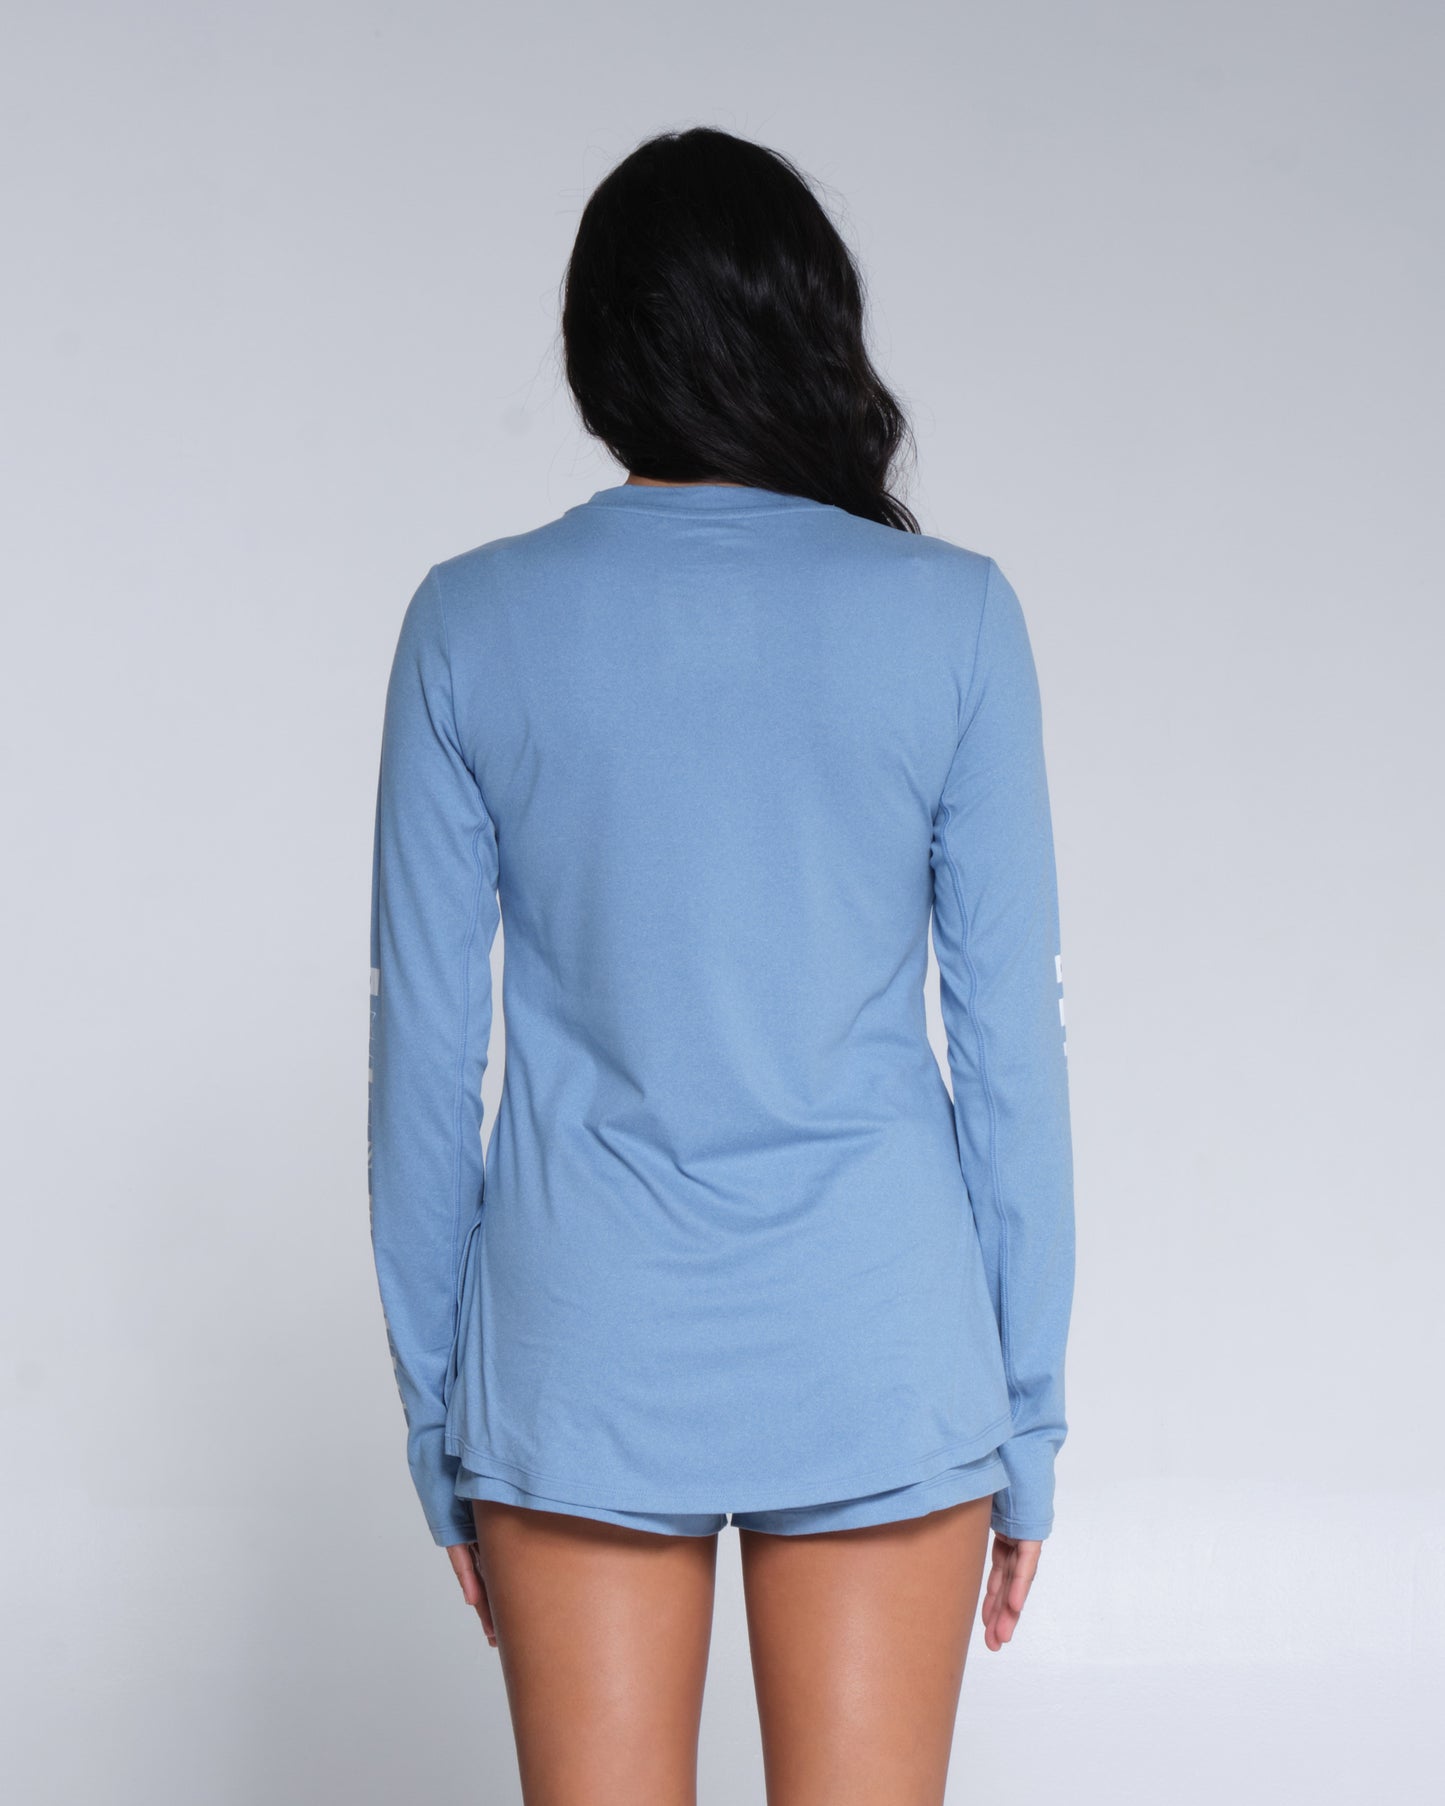 back view of Thrill Seekers Marine Blue Crew Sunshirt